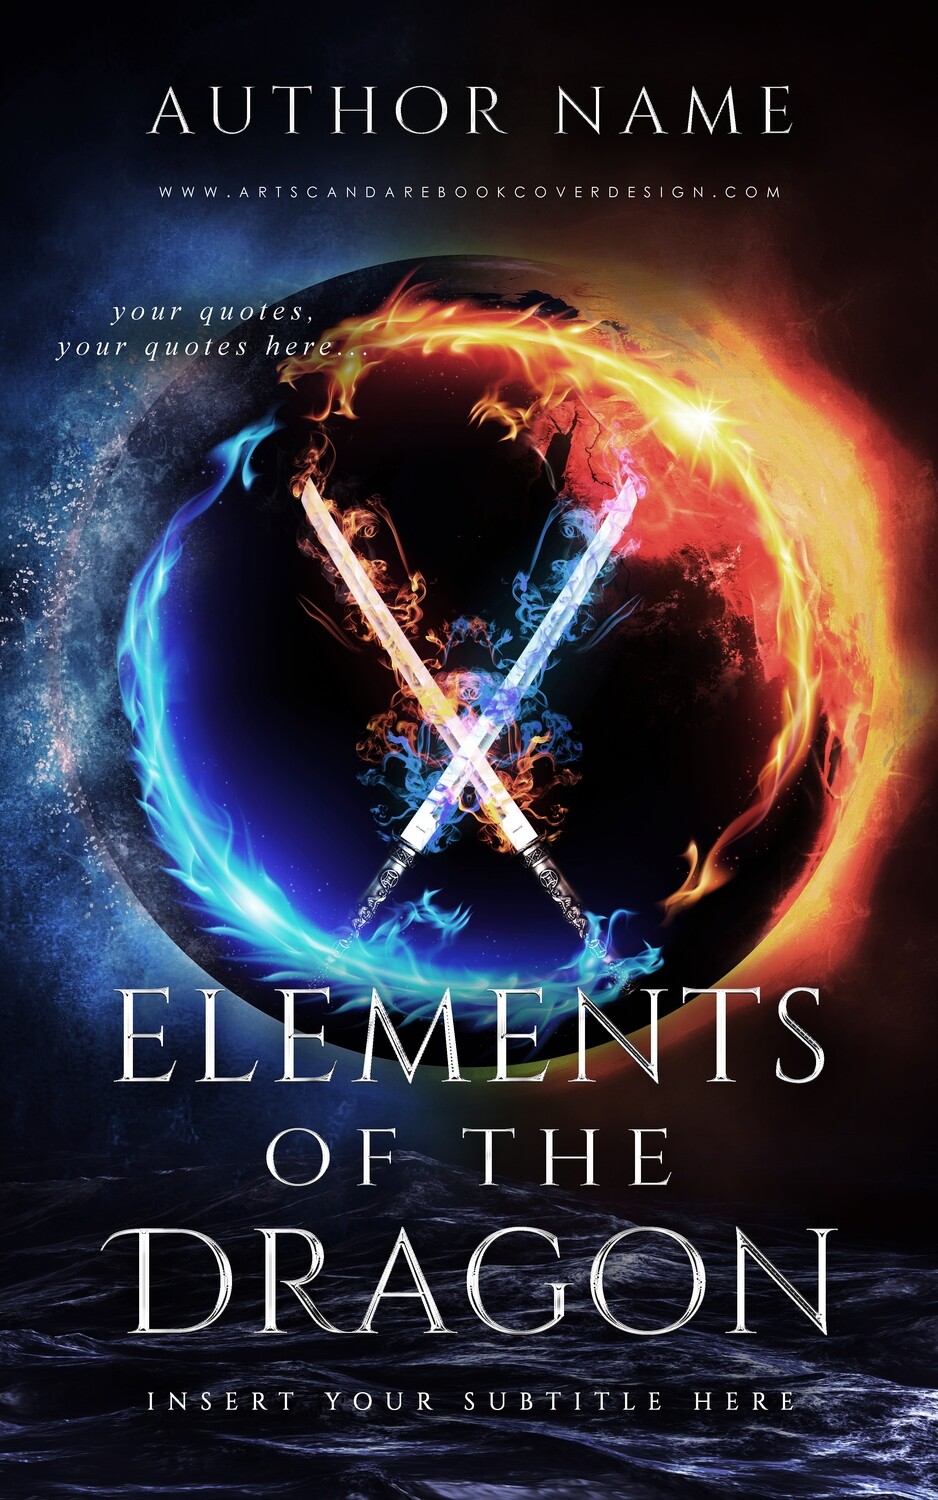 Ebook: Elements of the Dragon